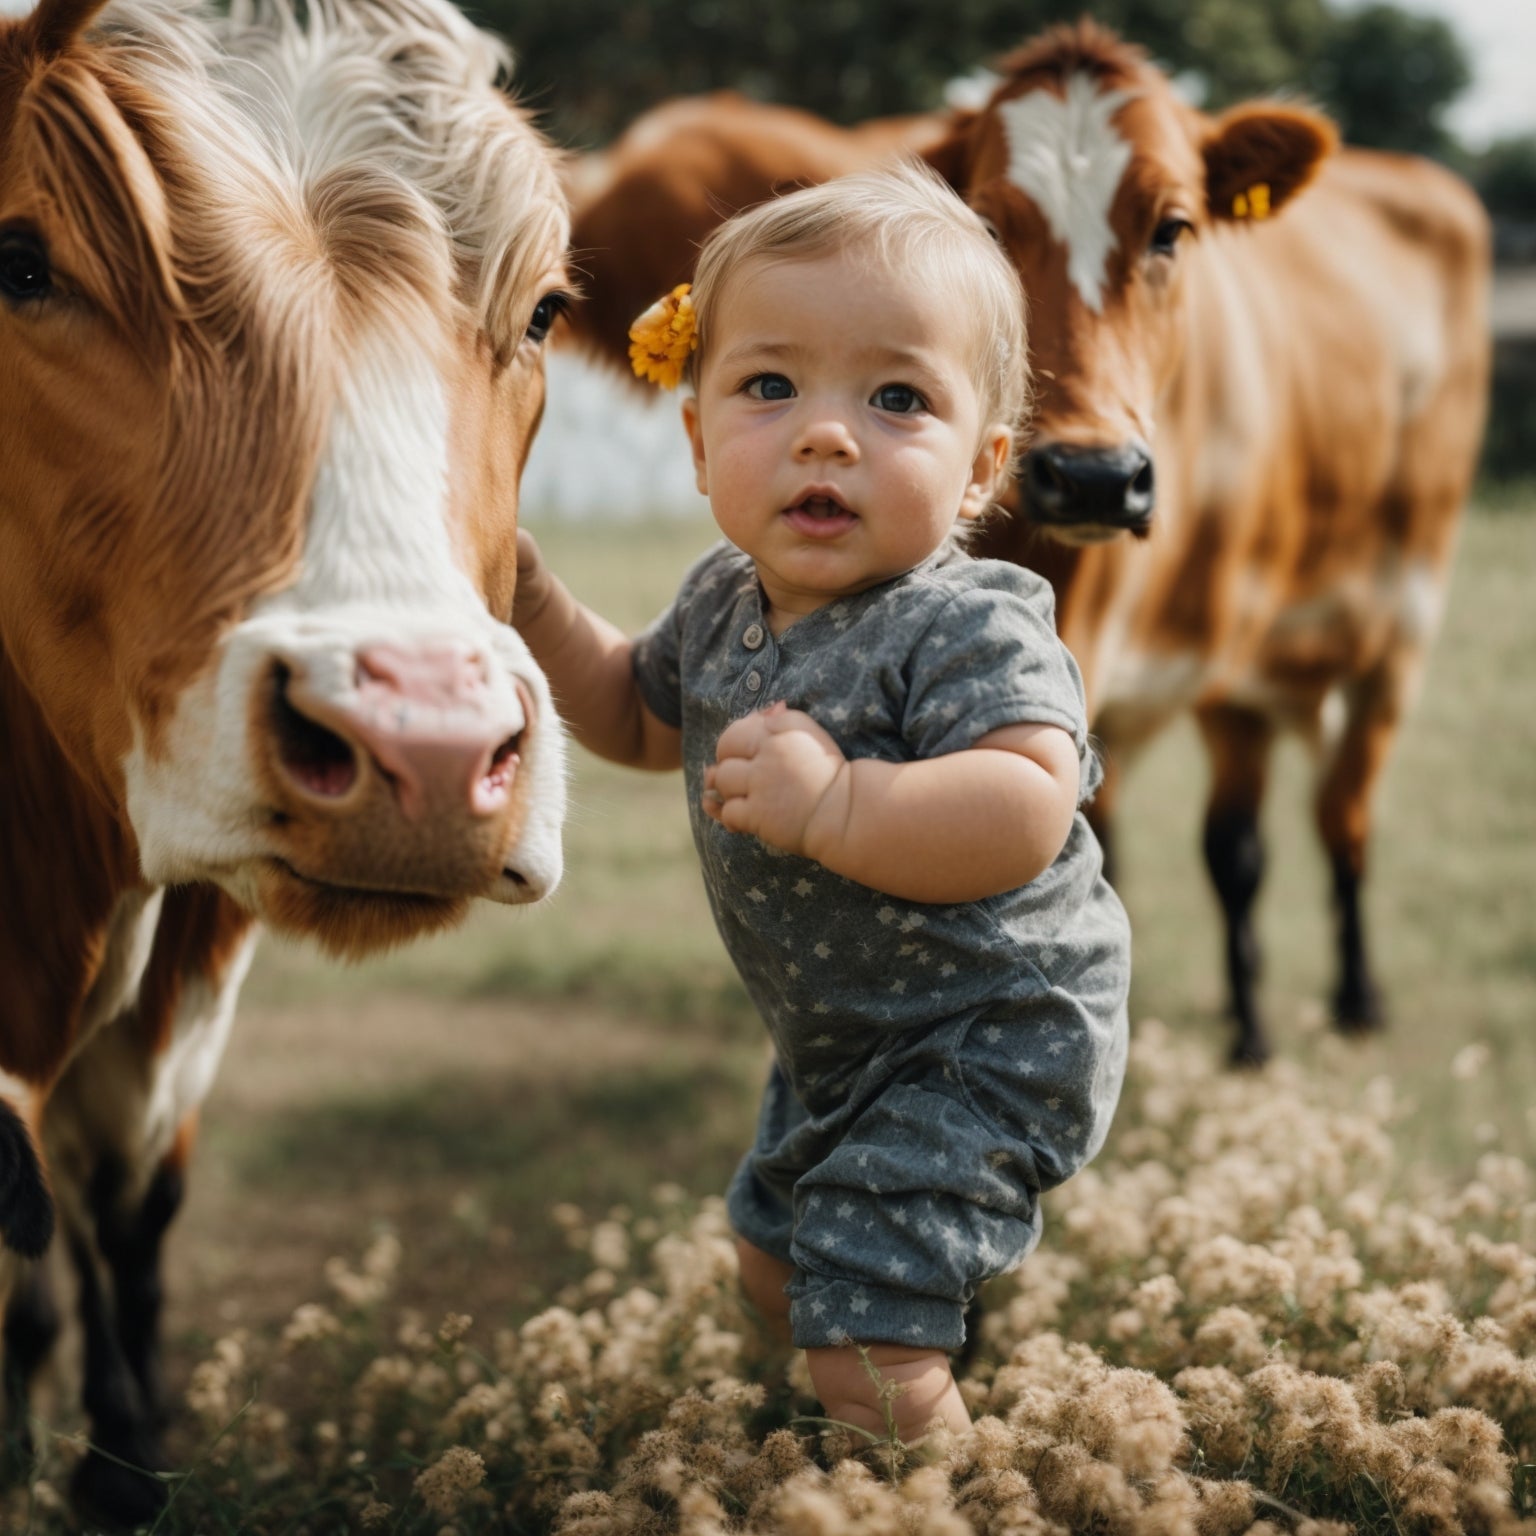 How to Know if Your Baby Has a Cow's Milk Allergy